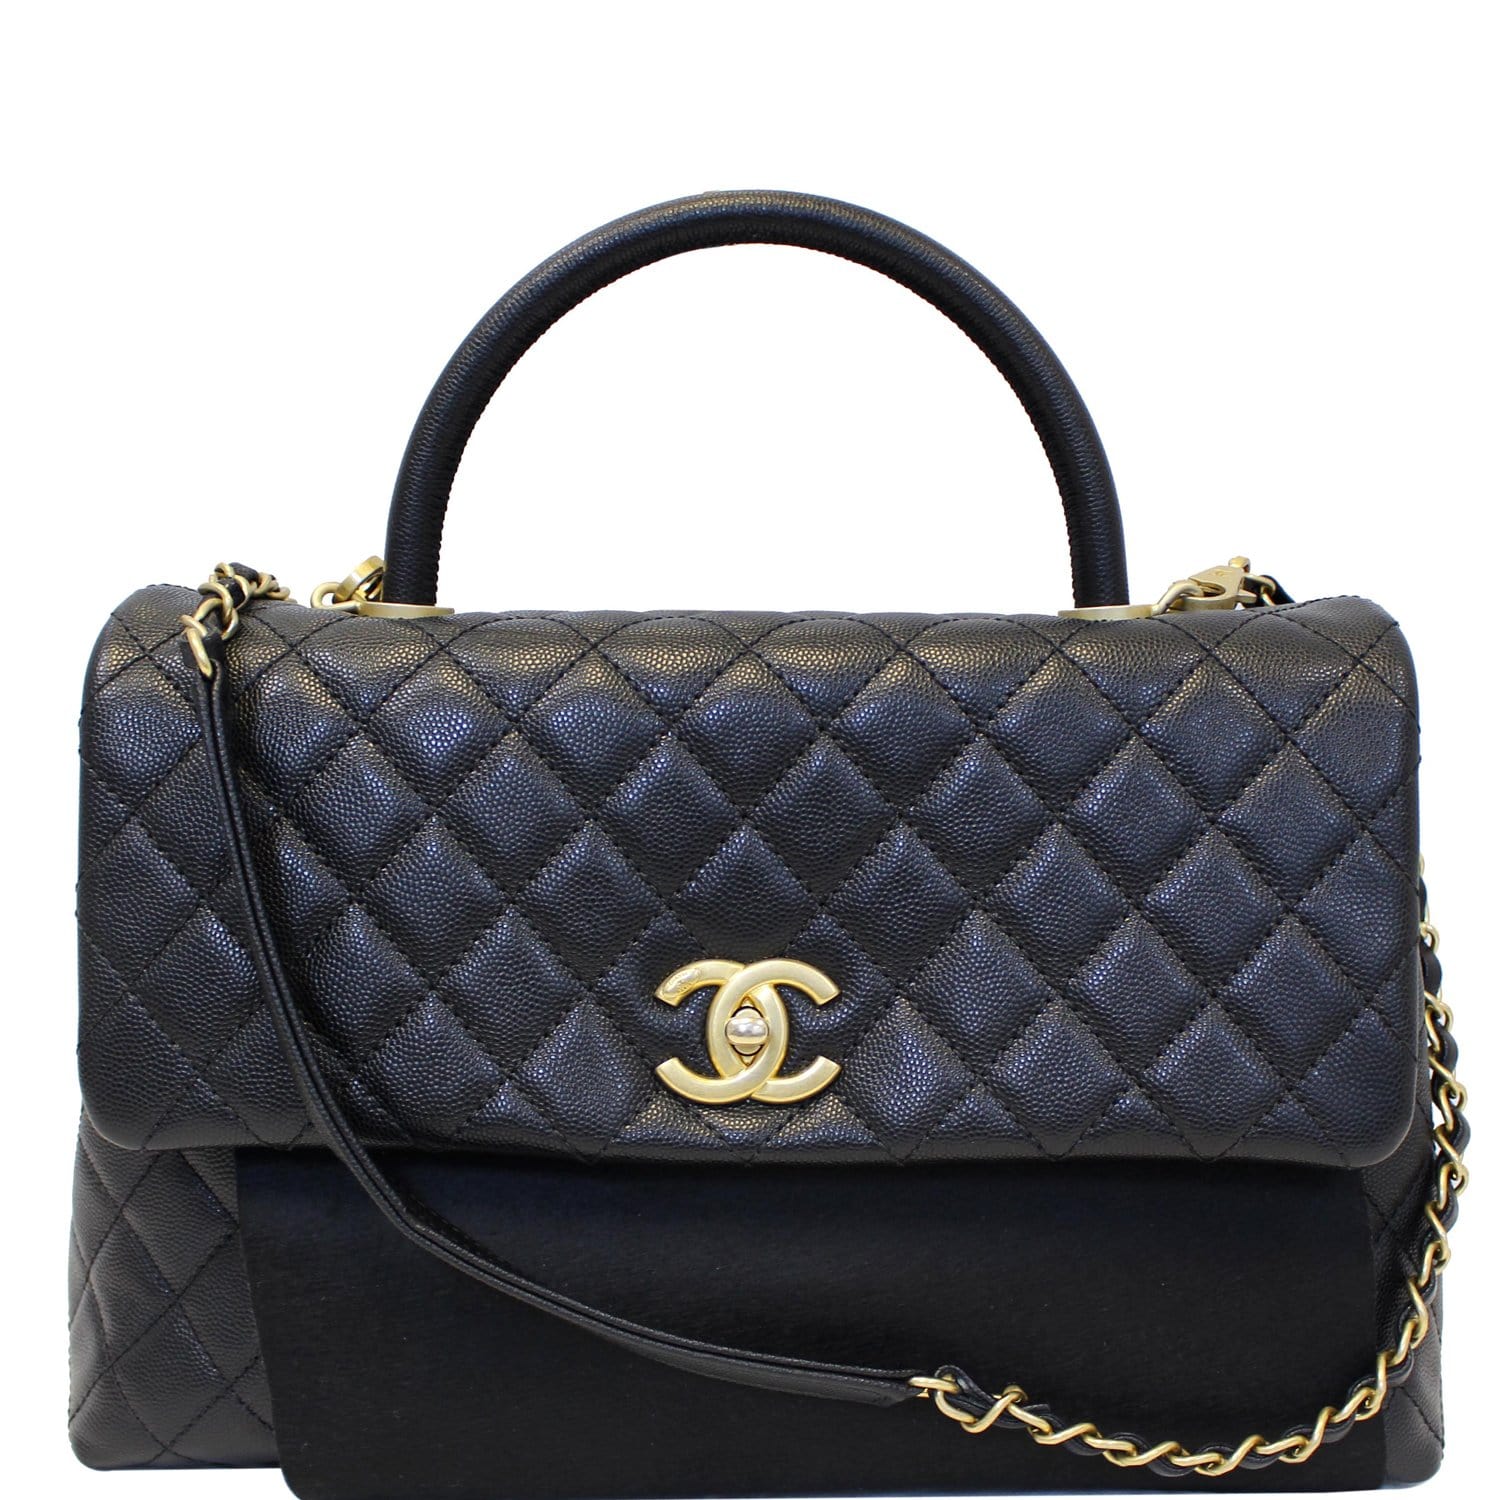 CHANEL, Bags, Chanel Caviar Coco Top Handle Bag Newlimited Edition 23p  Latest Collection